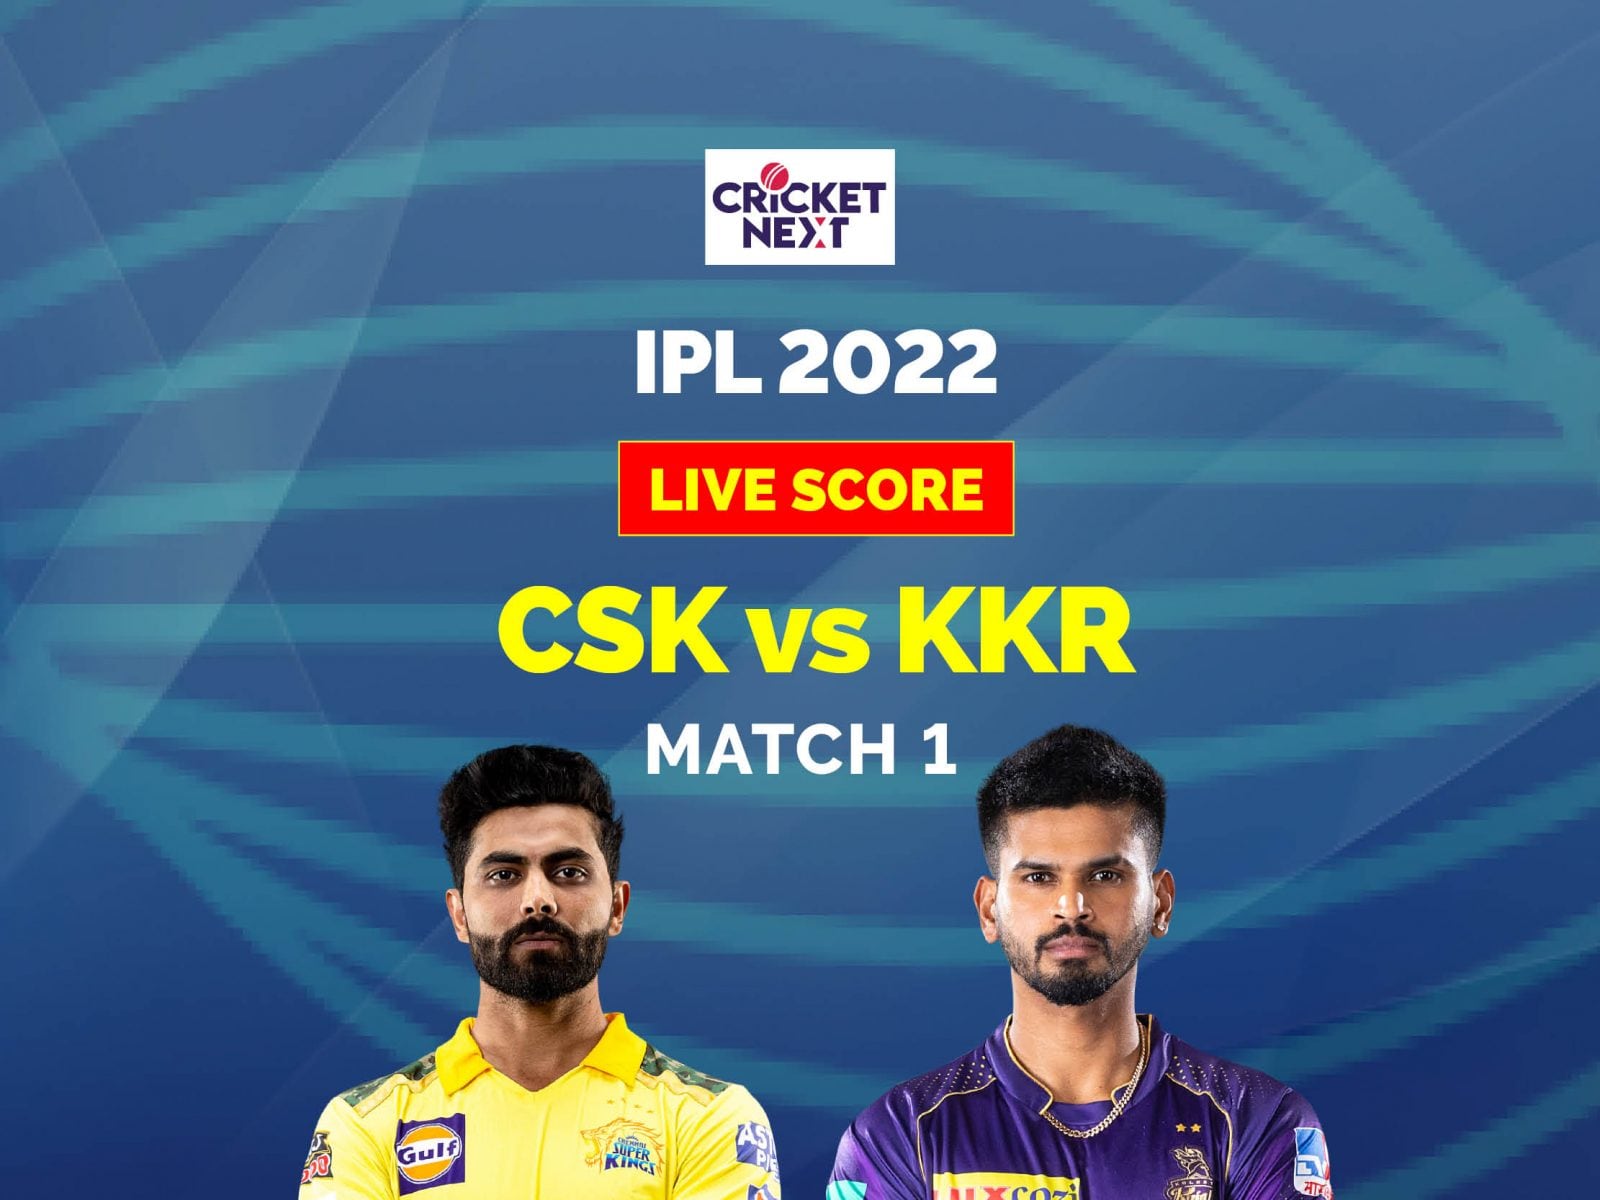 CSK vs KKR, IPL 2022 Match 1 Highlights Easy Win for KKR In Opener, Beat CSK By Six Wickets